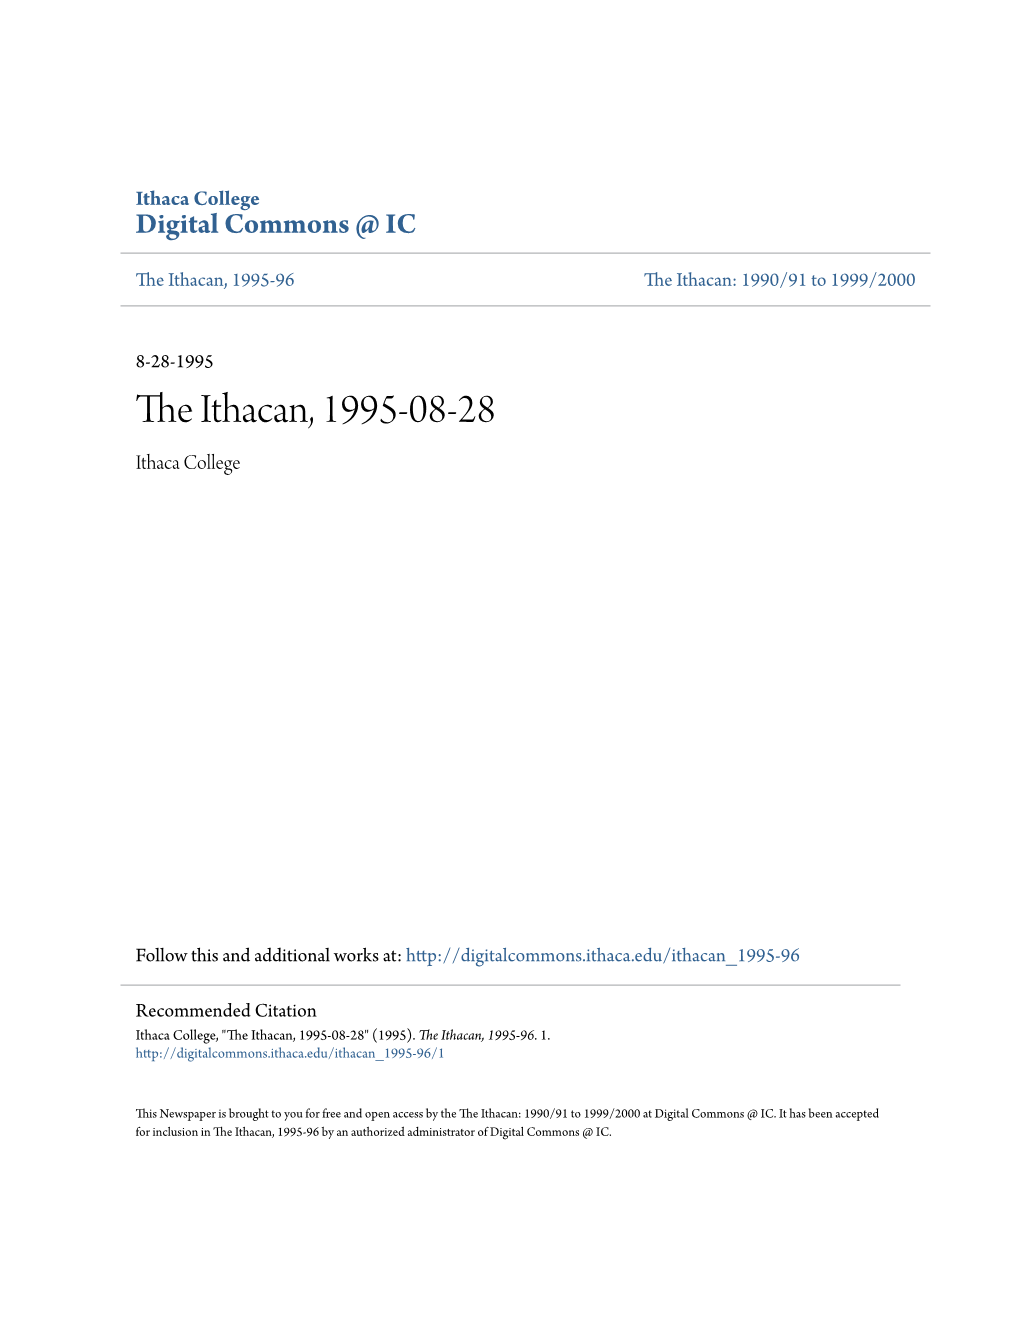 The Ithacan, 1995-08-28